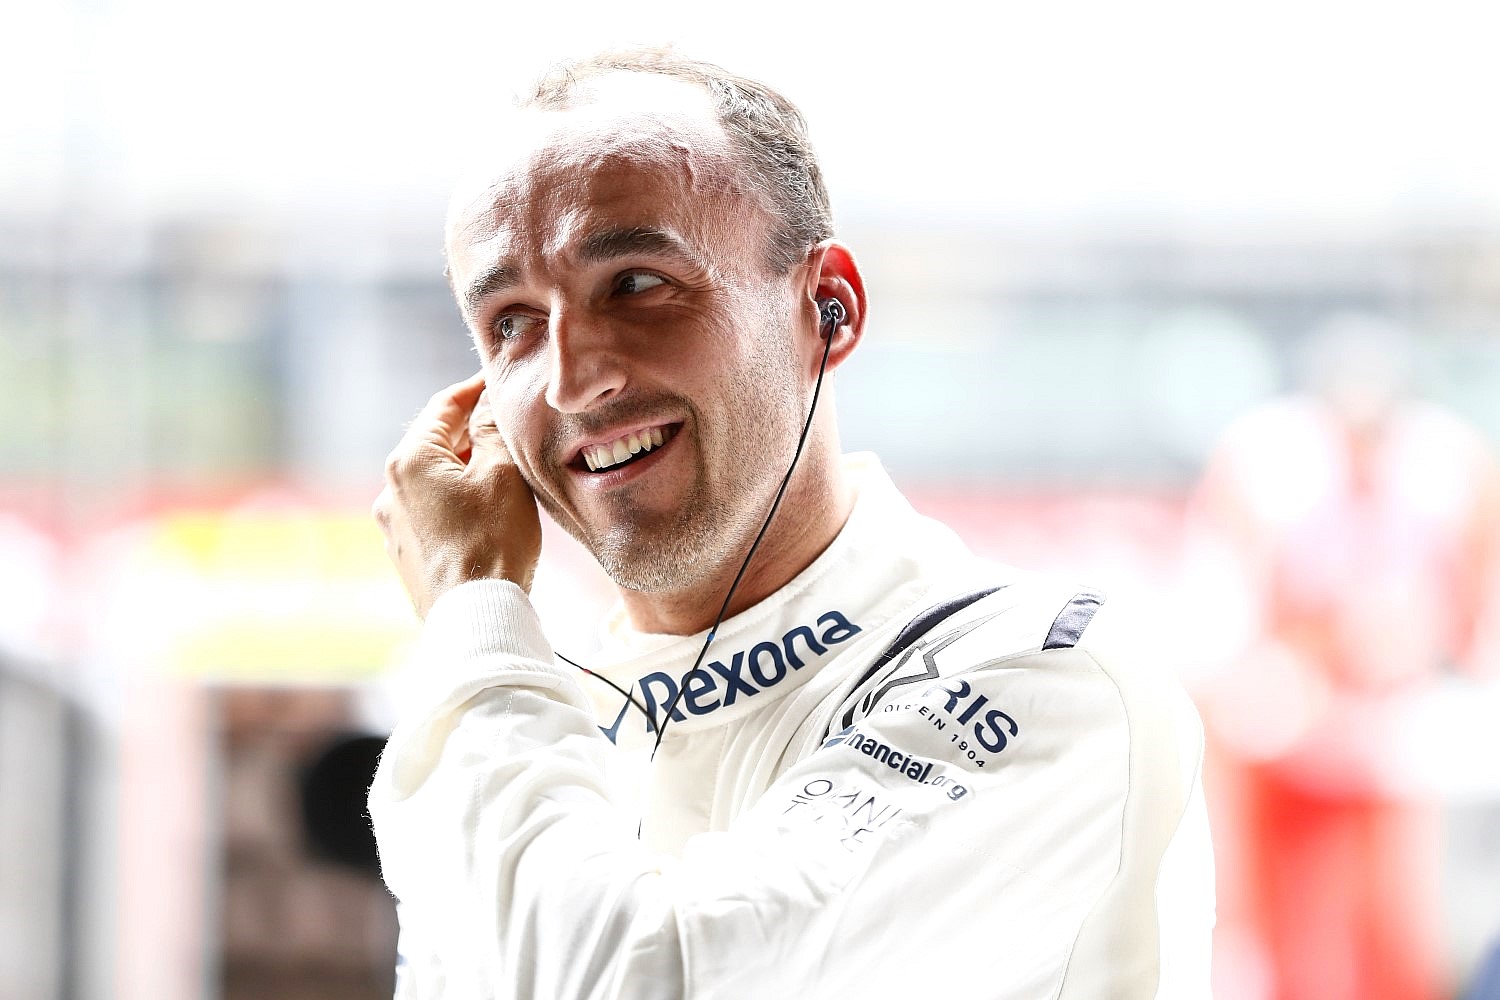 Kubica mocks Paddy Lowe's Williams, says the "Livery is nice, colors are nice"